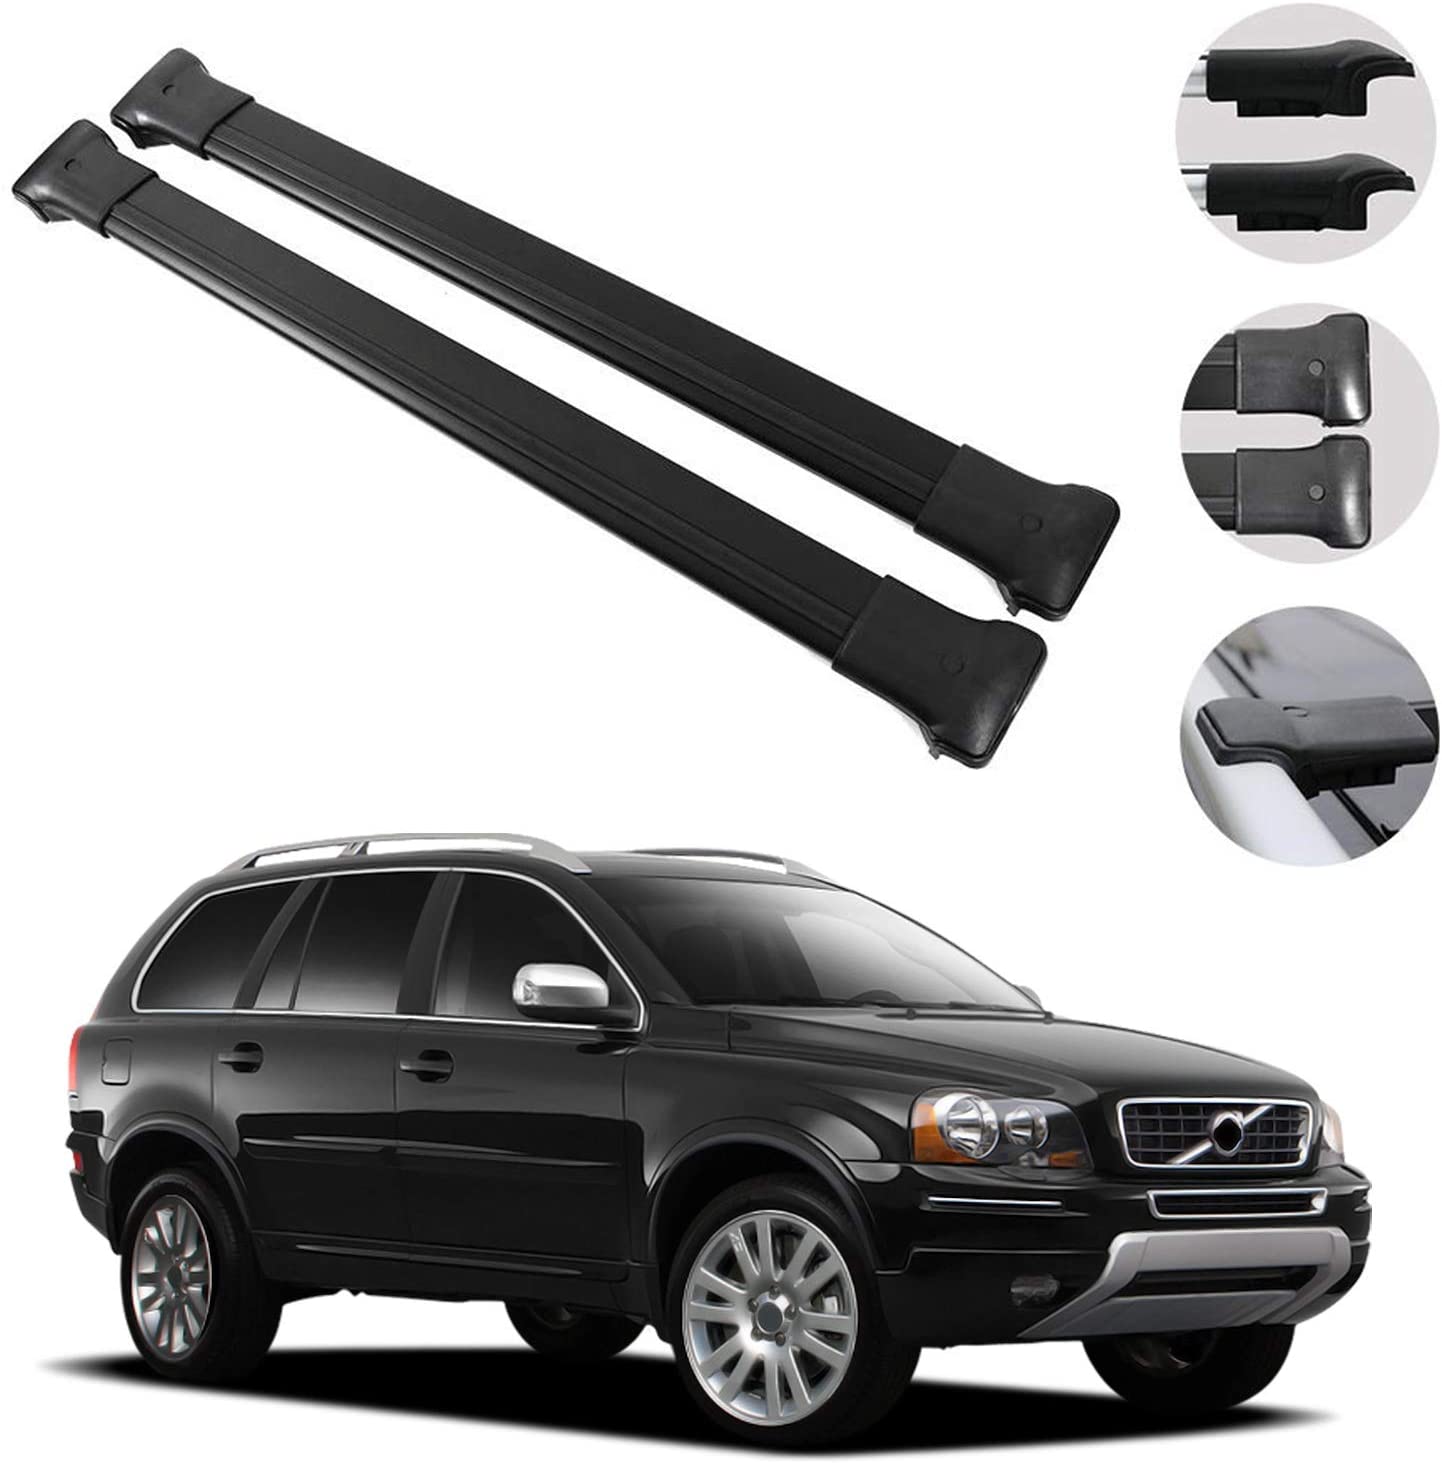 OMAC Roof Rack Cross Bars Luggage Carrier Black 2 Pcs Fits Volvo XC90 2003-2015 | Aluminum Black Cargo Carrier Rooftop Luggage Crossbars